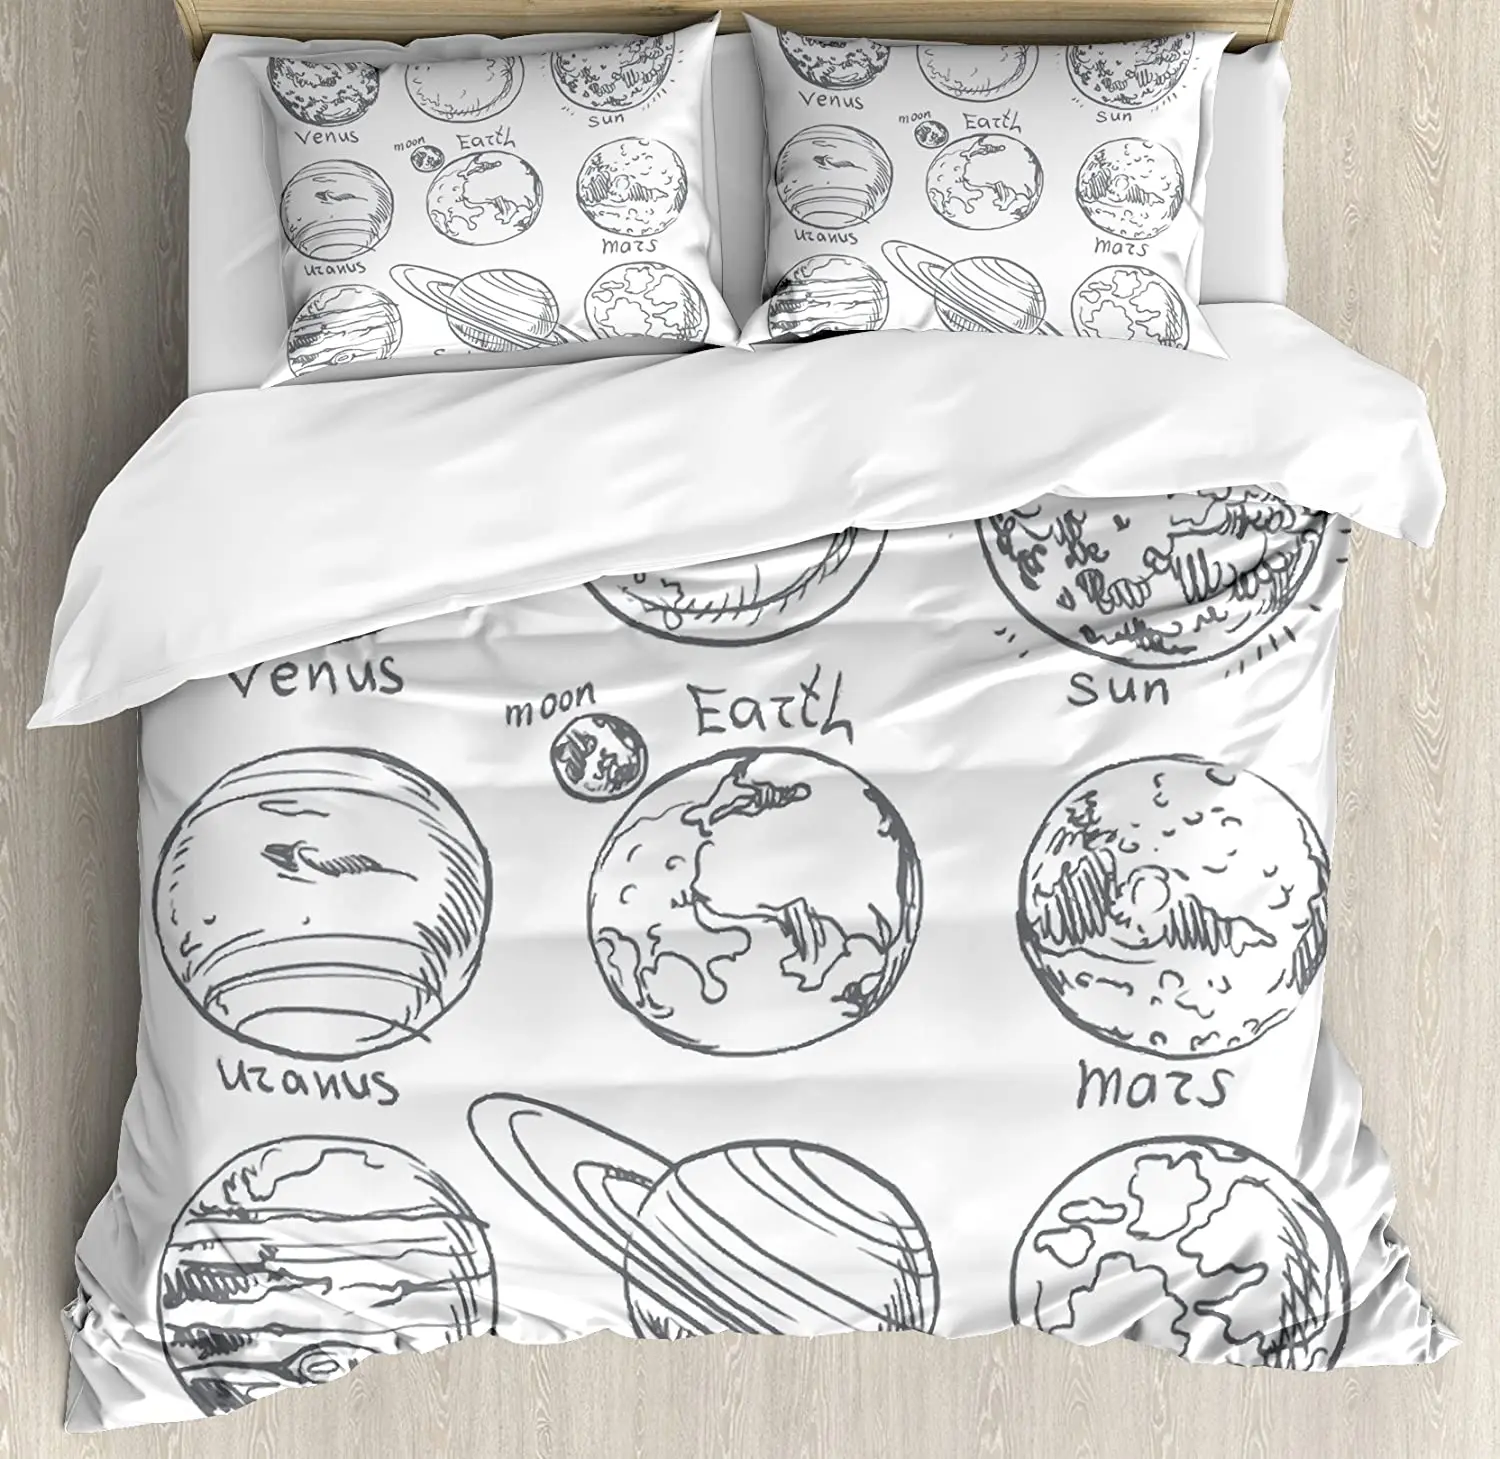 

Doodle Bedding Set For Bedroom Bed Home Planets of Solar System Sun Mercury Earth Moon Mar Duvet Cover Quilt Cover Pillowcase